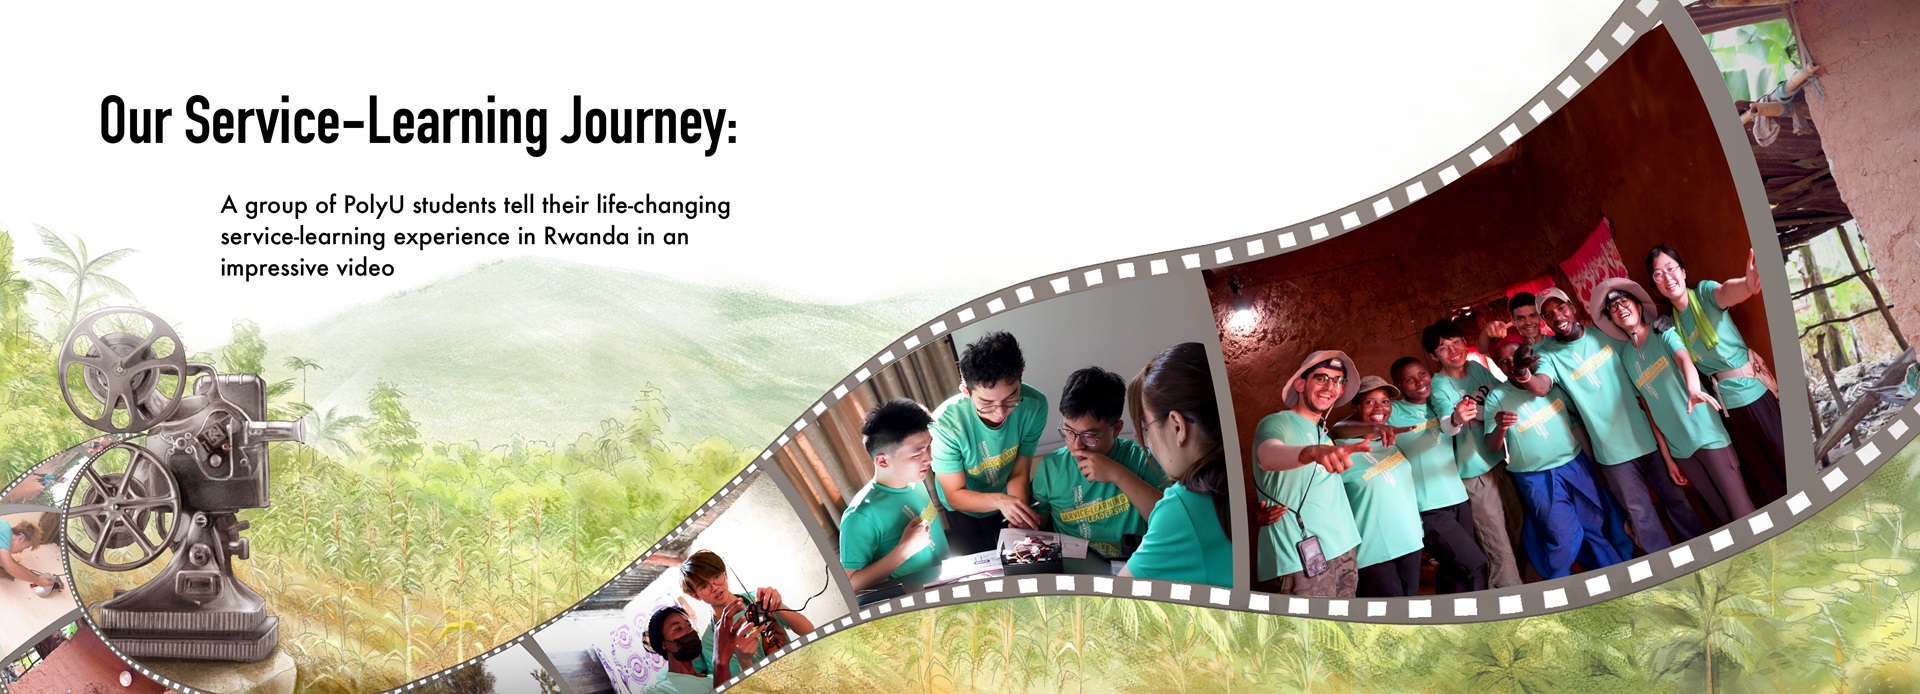 Our service journey